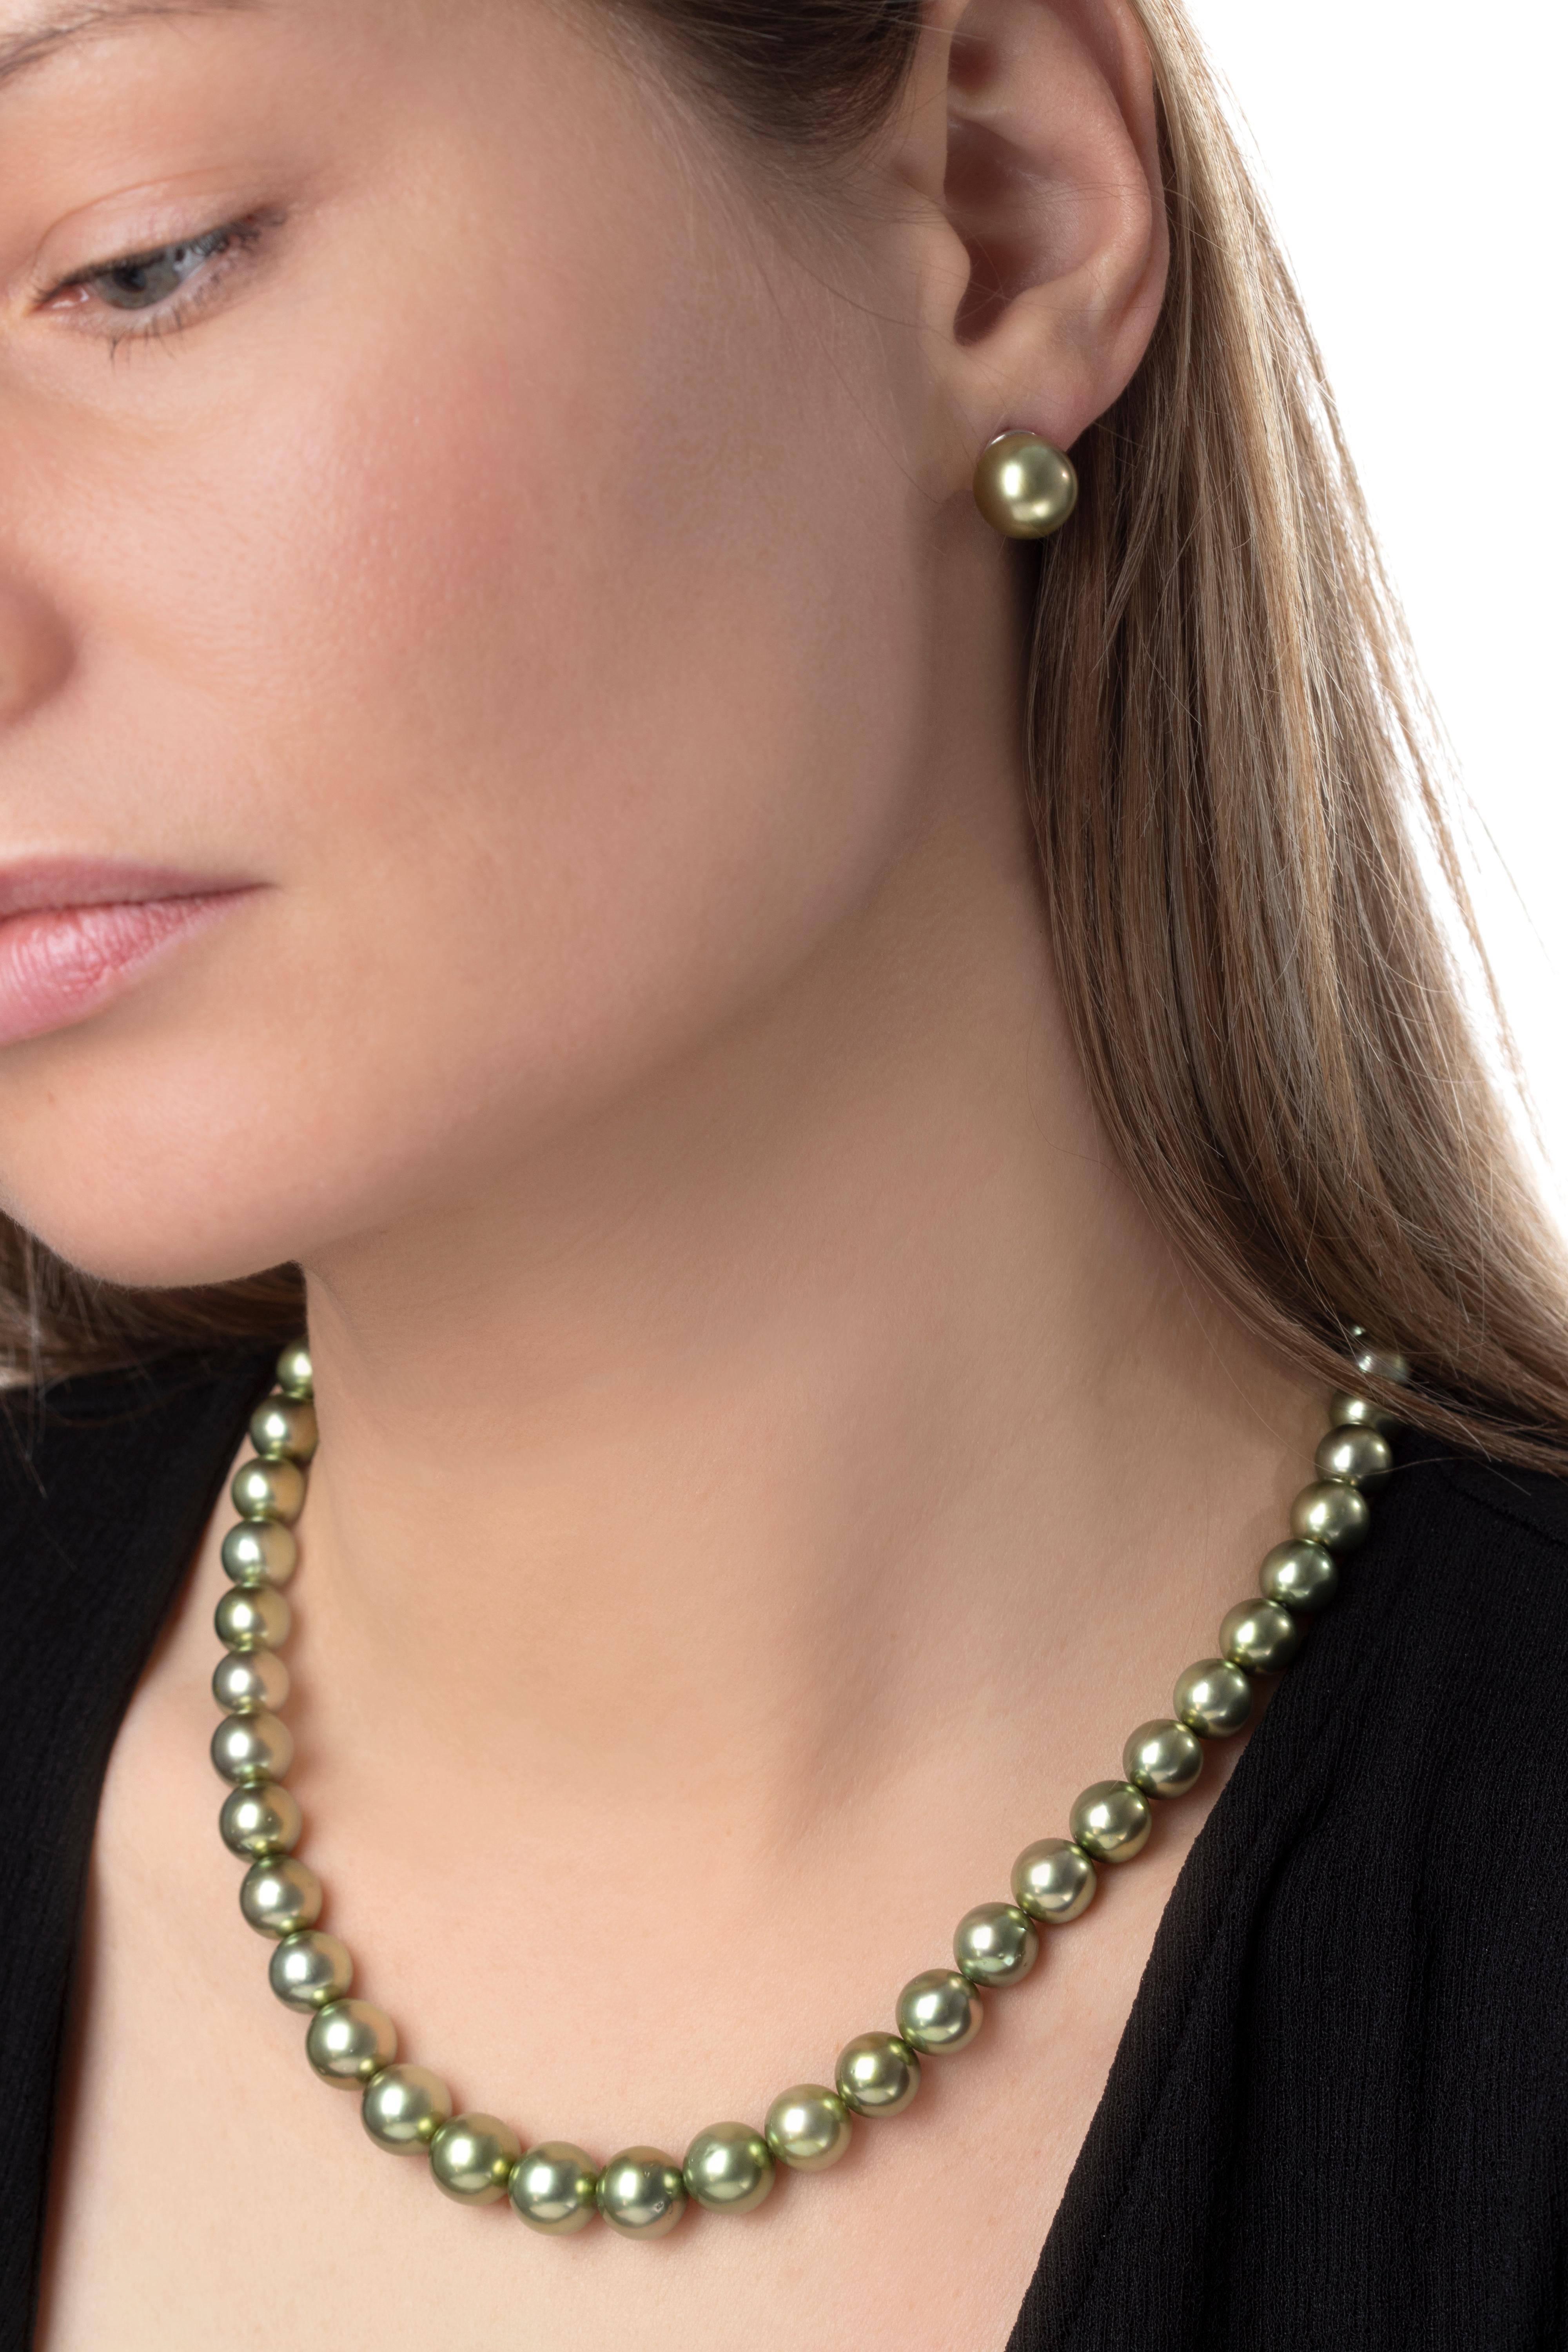 This classic style necklace with a vibrant twist features a row of high quality pistachio coloured Tahitian pearls secured to an 18K White Gold clasp. To obtain the delicate green hue, these pearls have been treated resulting in a permanent colour